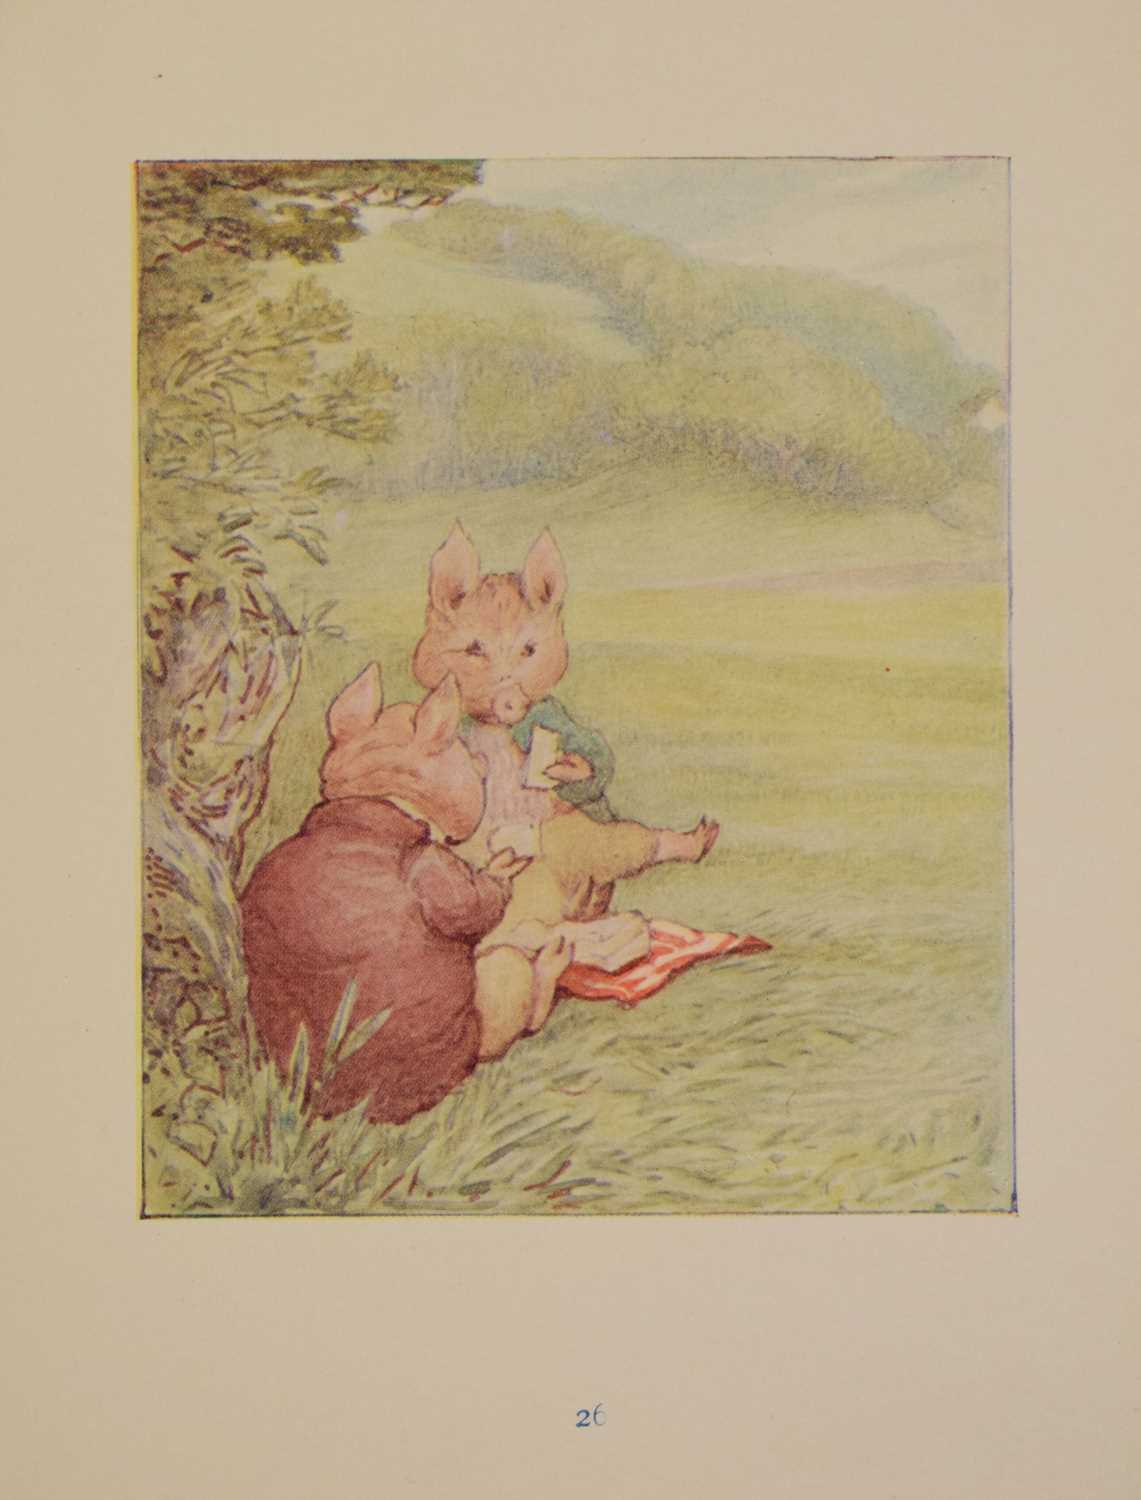 Potter, Beatrix - 'The Tale of Pigling Bland' - First edition 1913 - Image 9 of 19